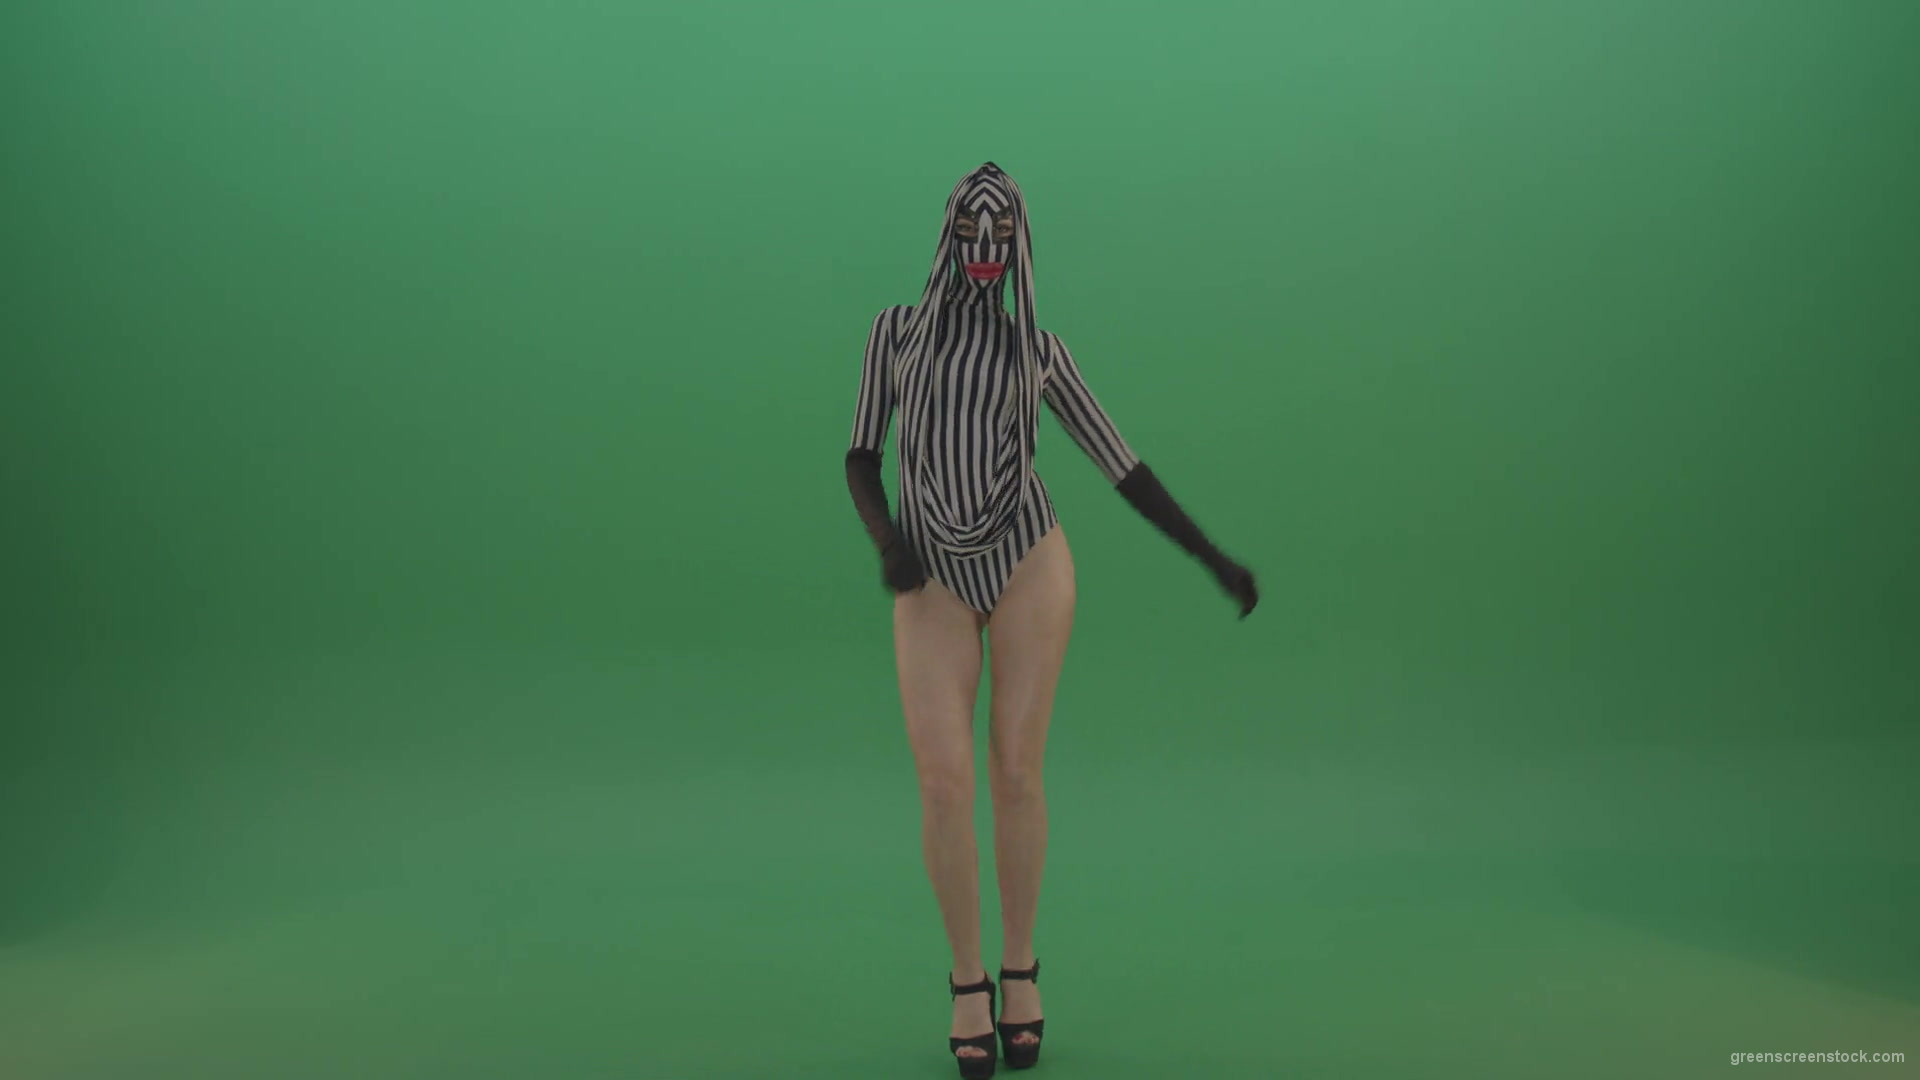 Long-legs-girl-march-in-white-black-stripe-costume-and-mask-on-green-screen-1920_006 Green Screen Stock